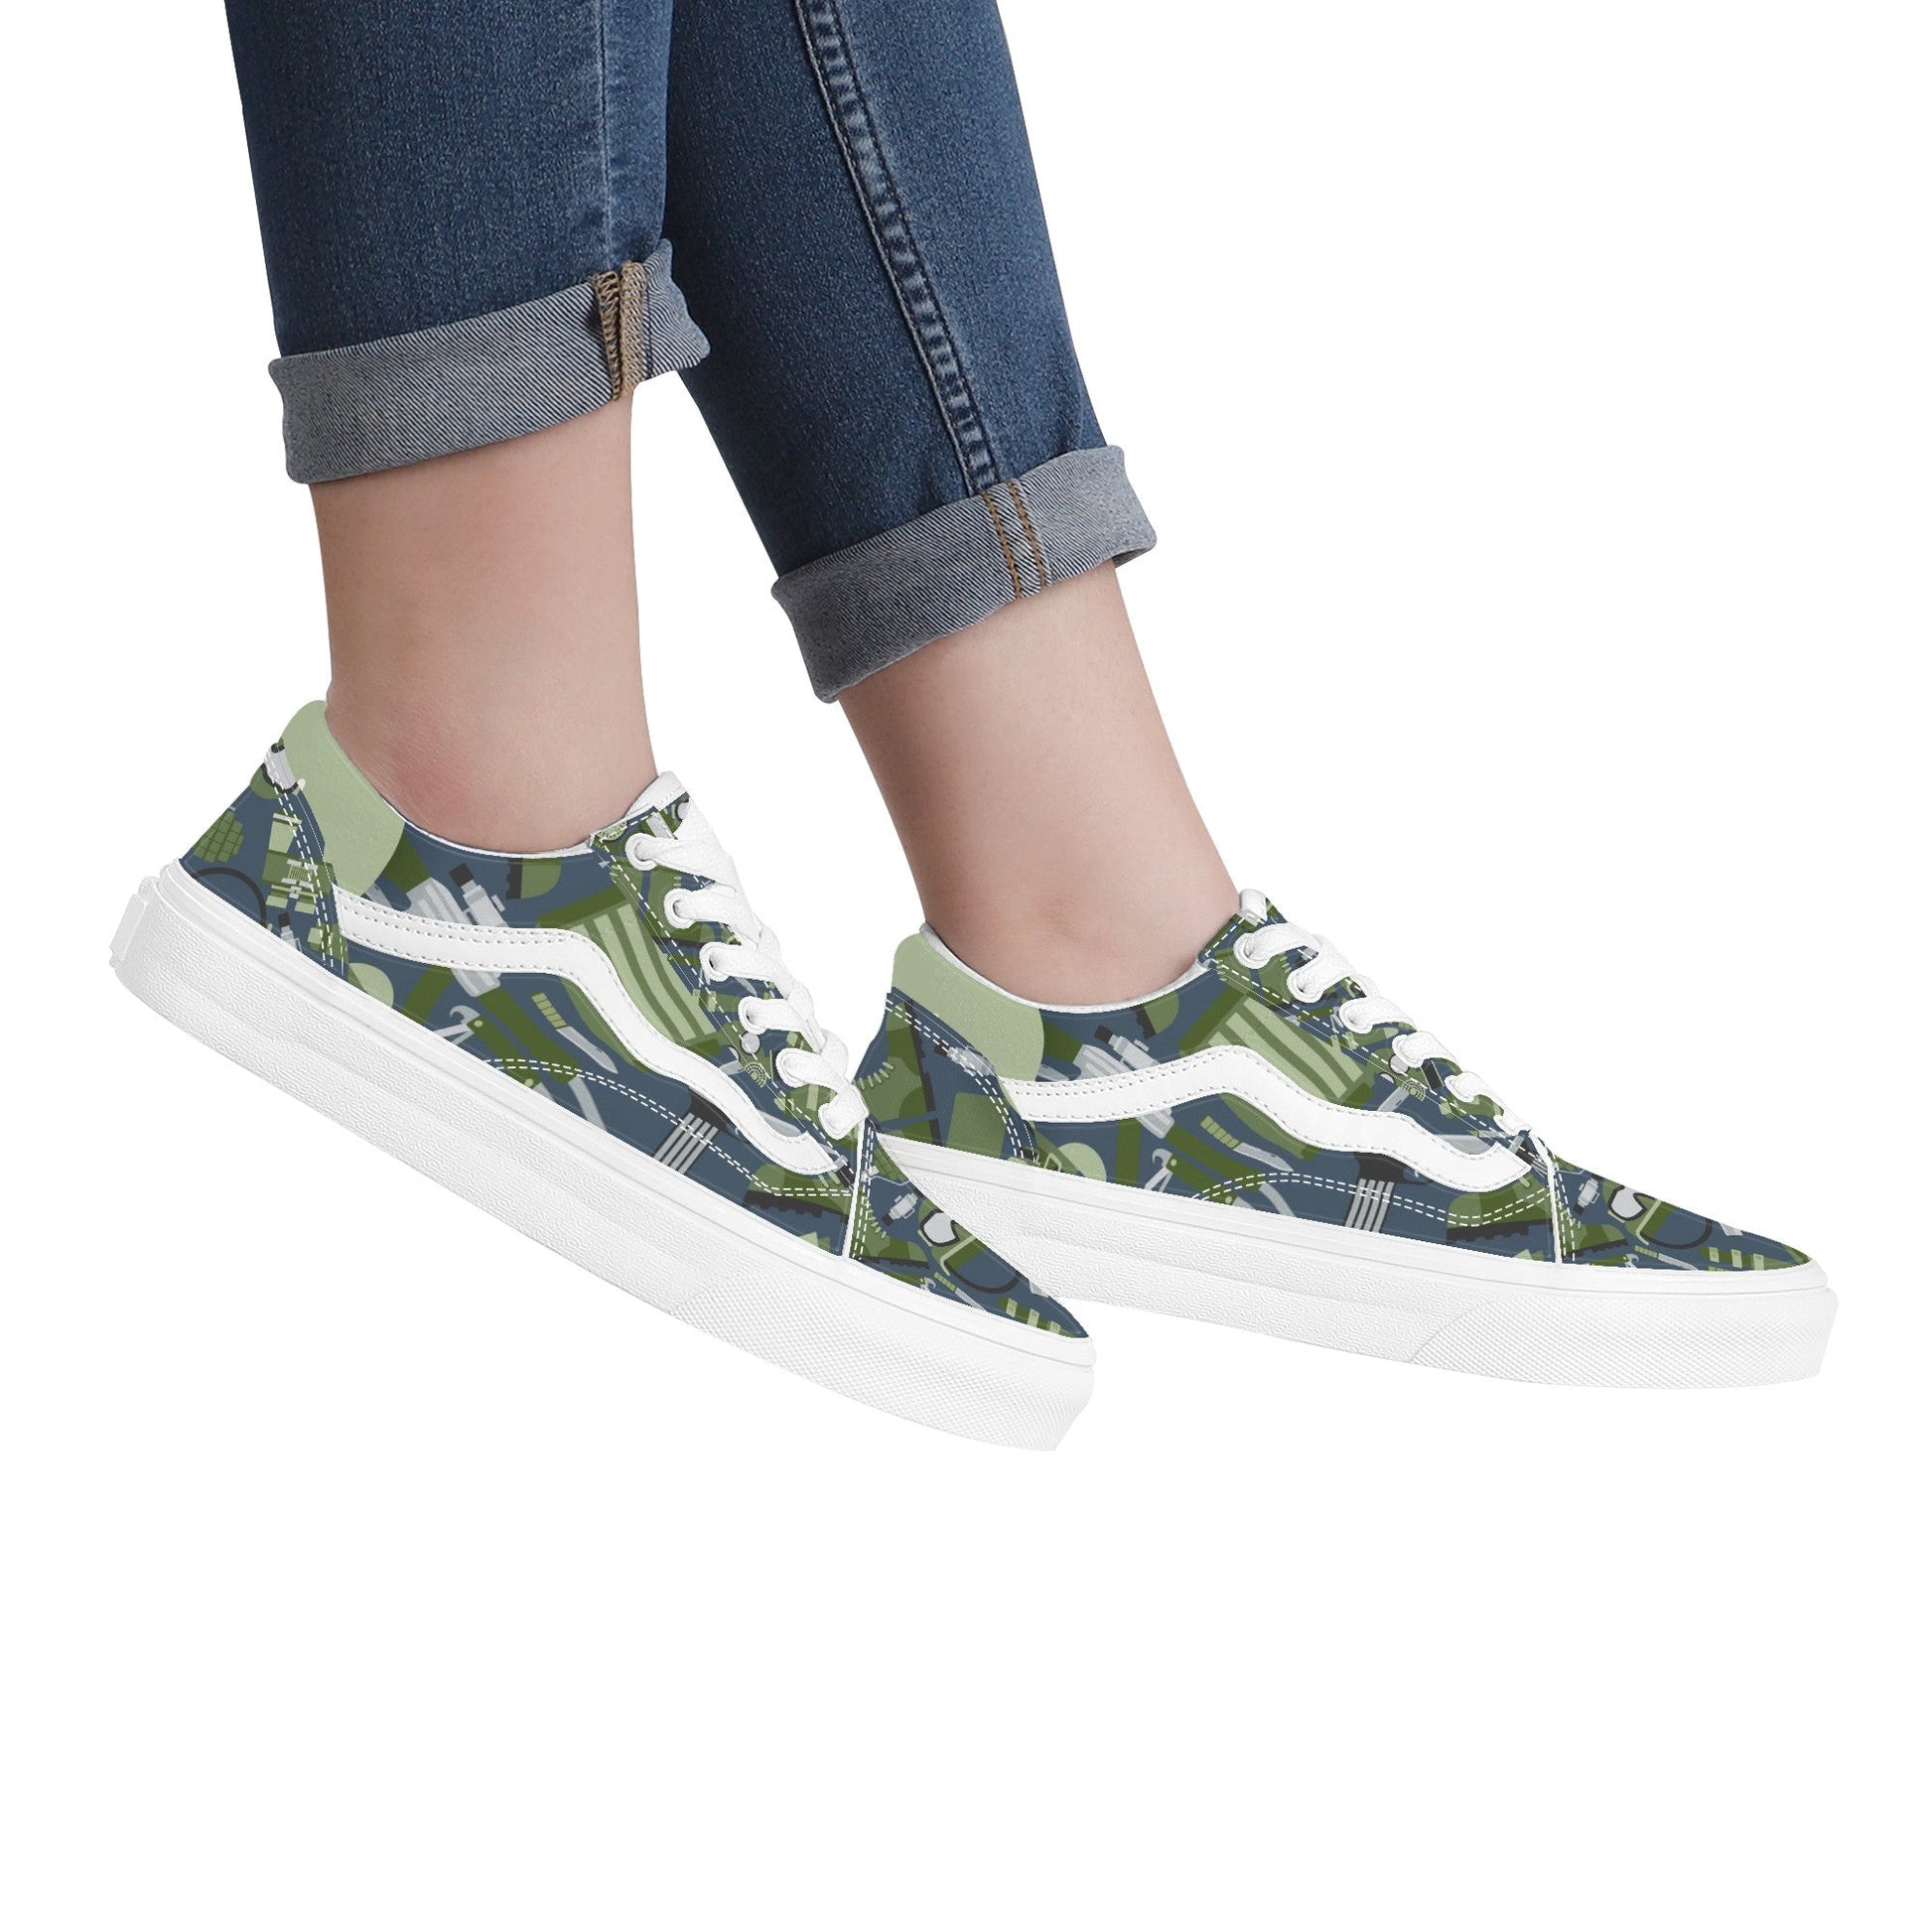 Designer Low Top Flat Sneakers -SF F21 X1 Colloid Colors 